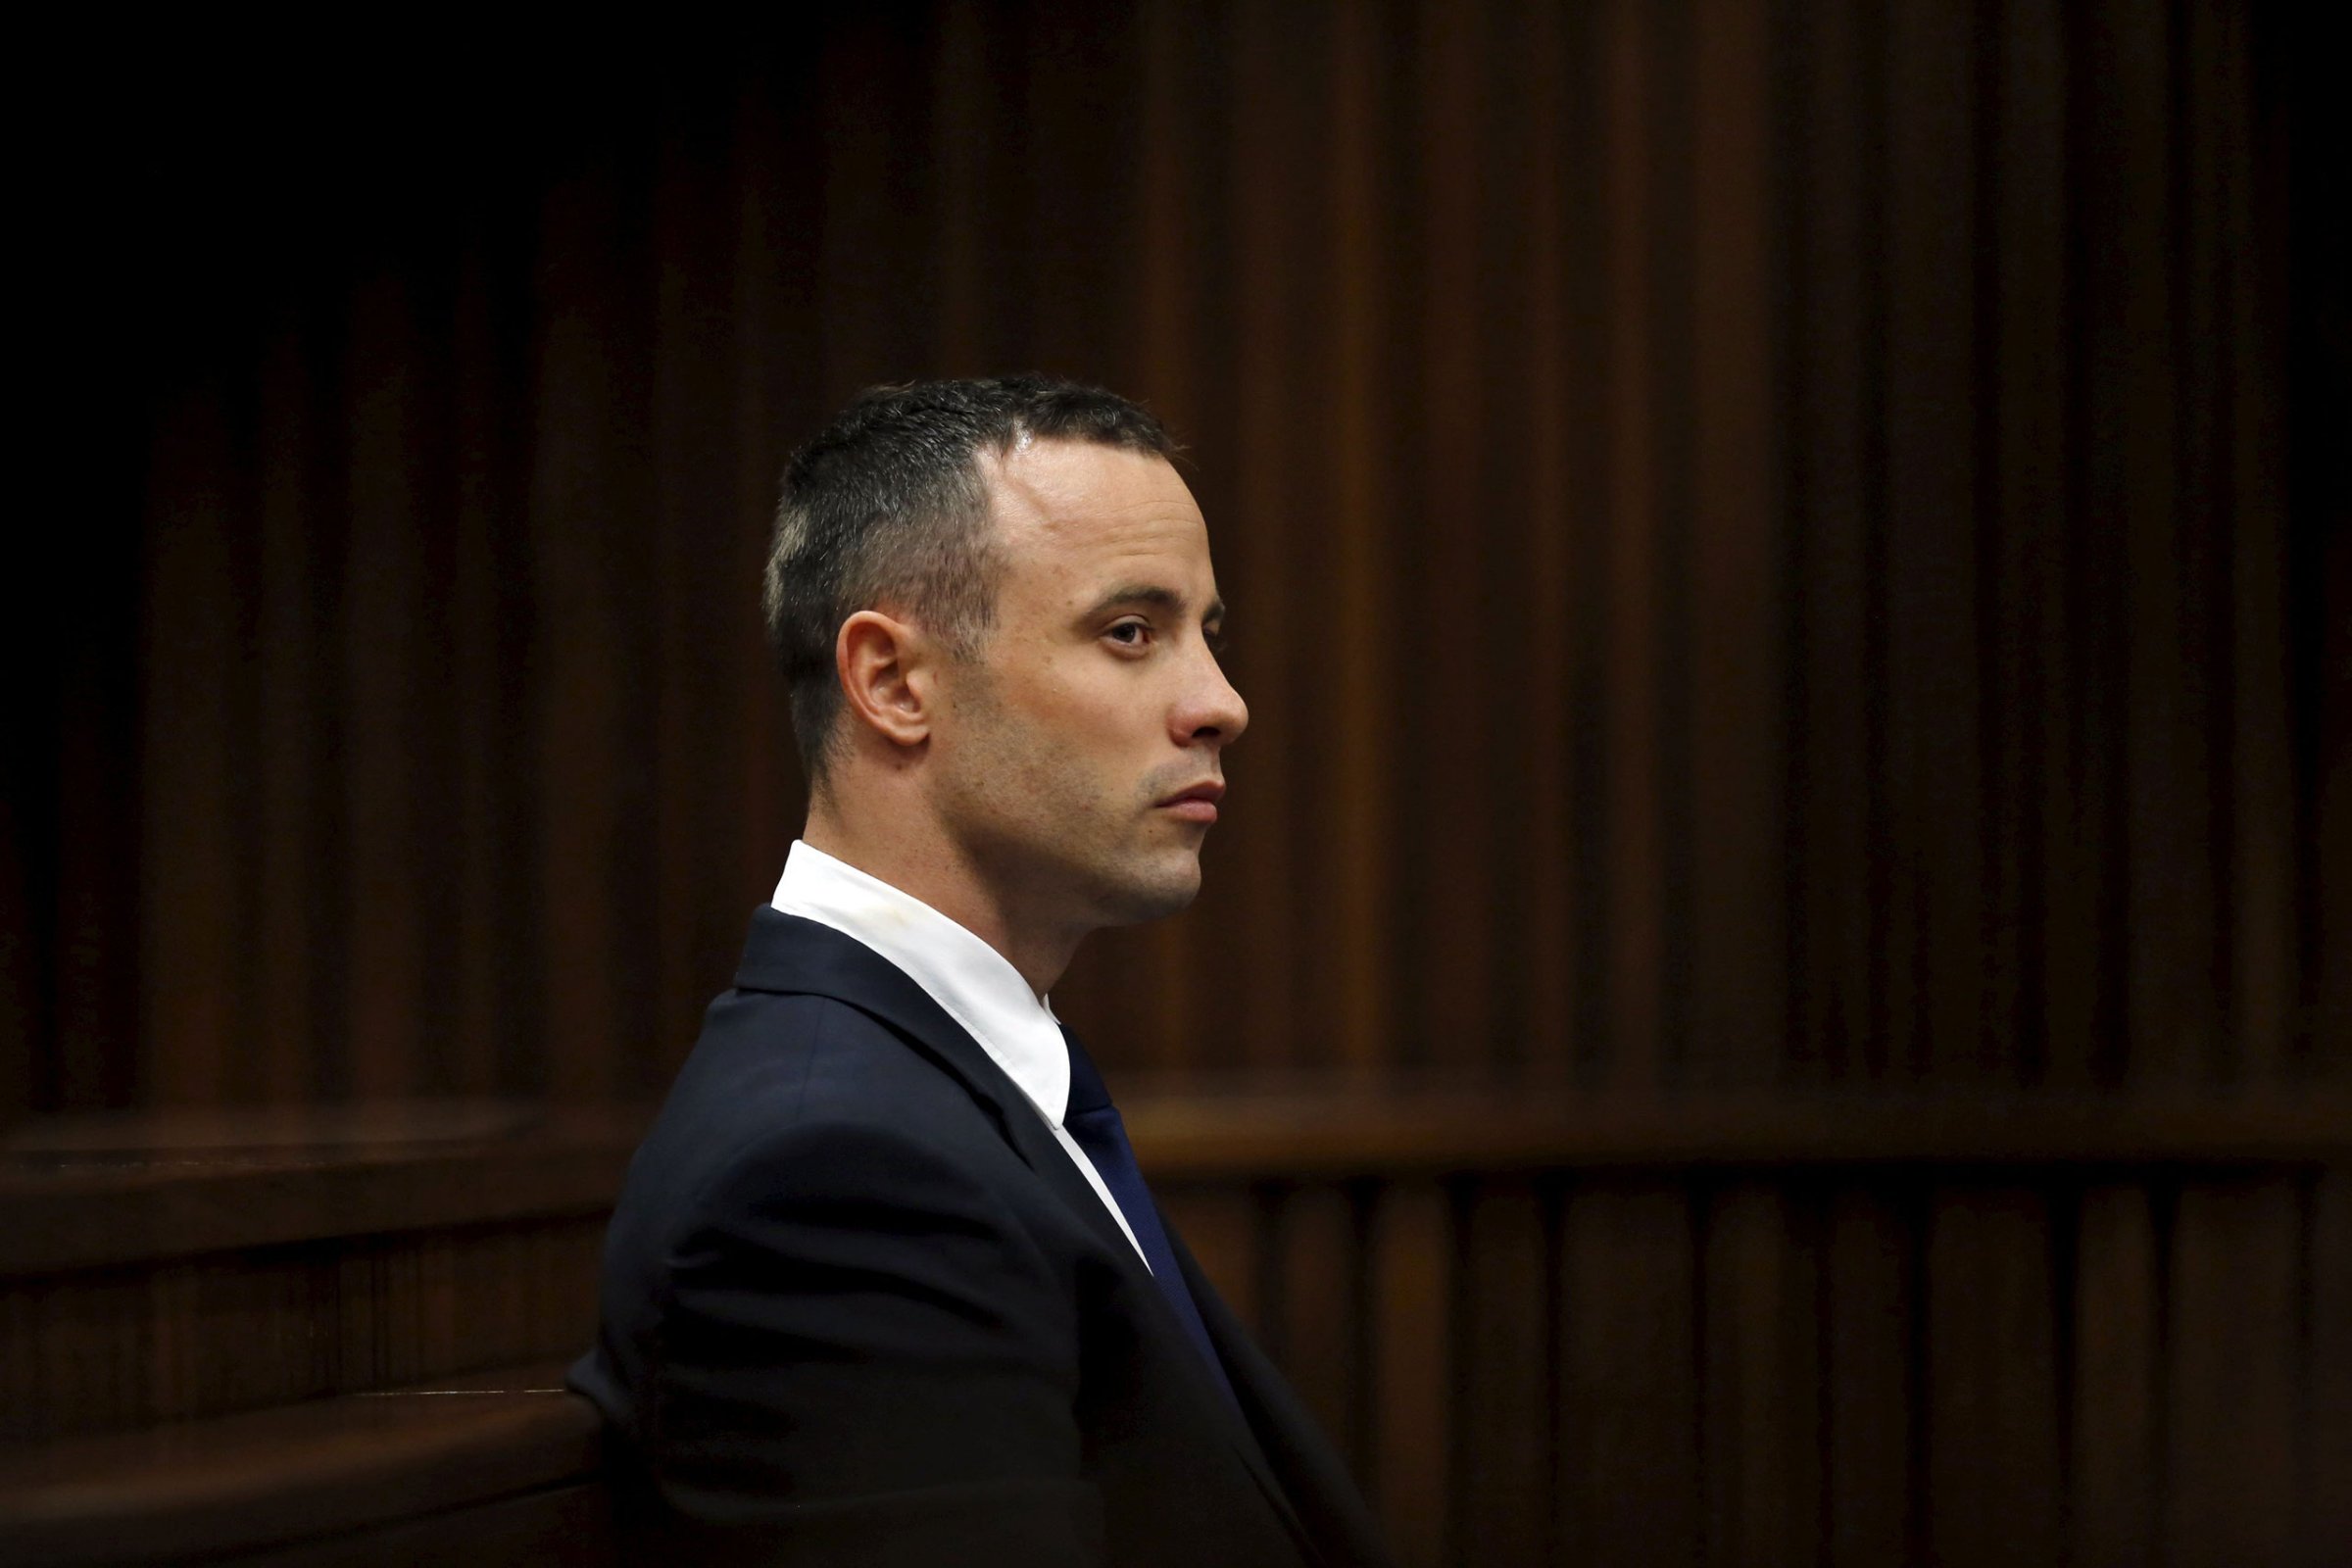 "Blade Runner" Oscar Pistorius sits in the dock during his trial in the North Gauteng High Court in Pretoria, in this file picture taken May 6, 2014. Pistorius, 29, is expected to wear an electronic tracking tag when he is released on Friday after serving 10 months of a five-year sentence for killing his model and law graduate girlfriend Reeva Steenkamp on Valentine's Day 2013. REUTERS/Mike Hutchings/Files